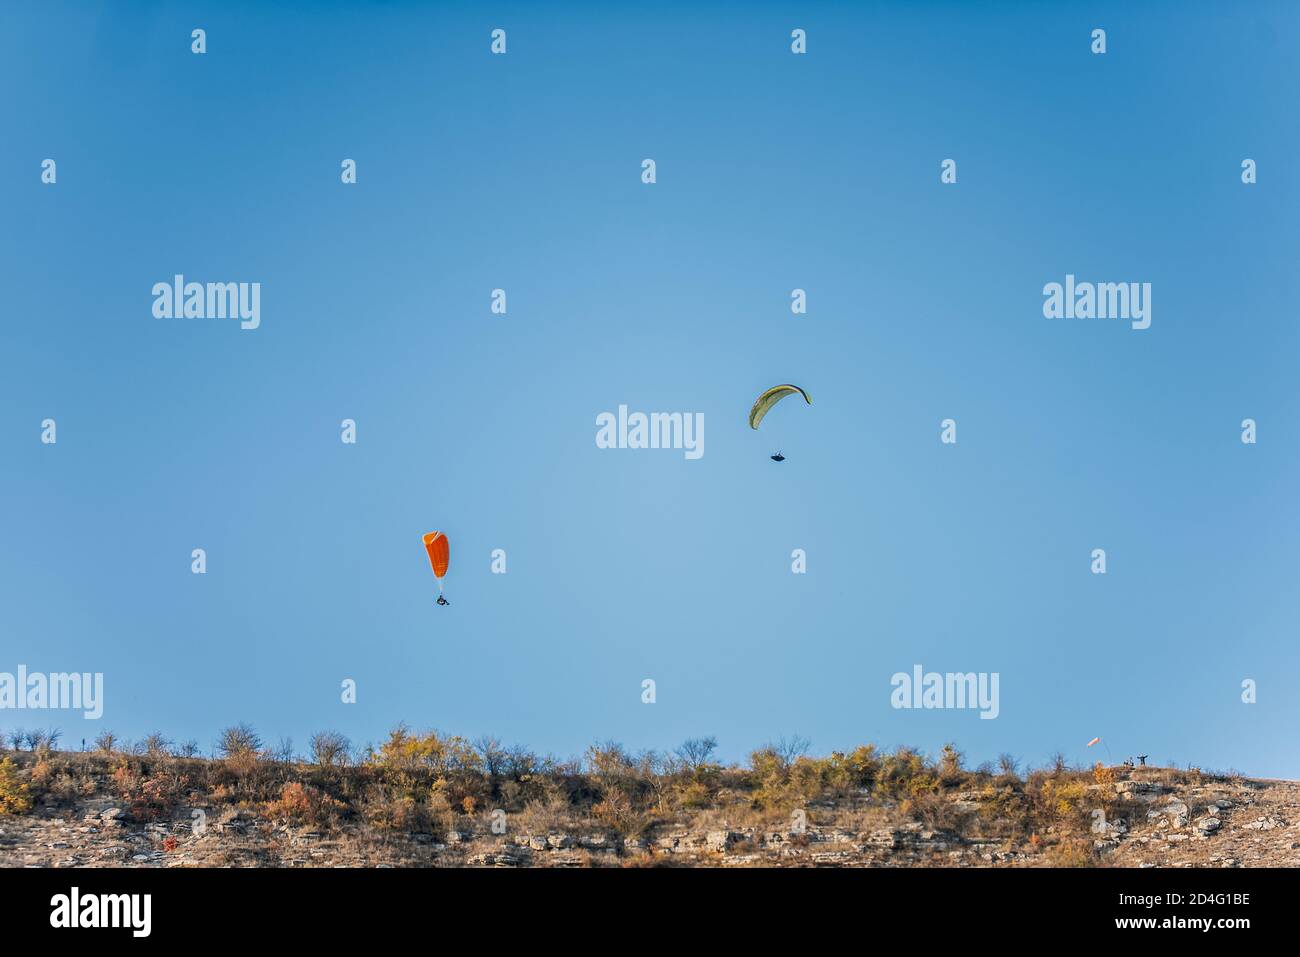 Paragliders with multi-colored parachutes fly high in the clear blue sky over steep cliffs. Parachuting, adrenalitis, love of height, risk, freedom Stock Photo